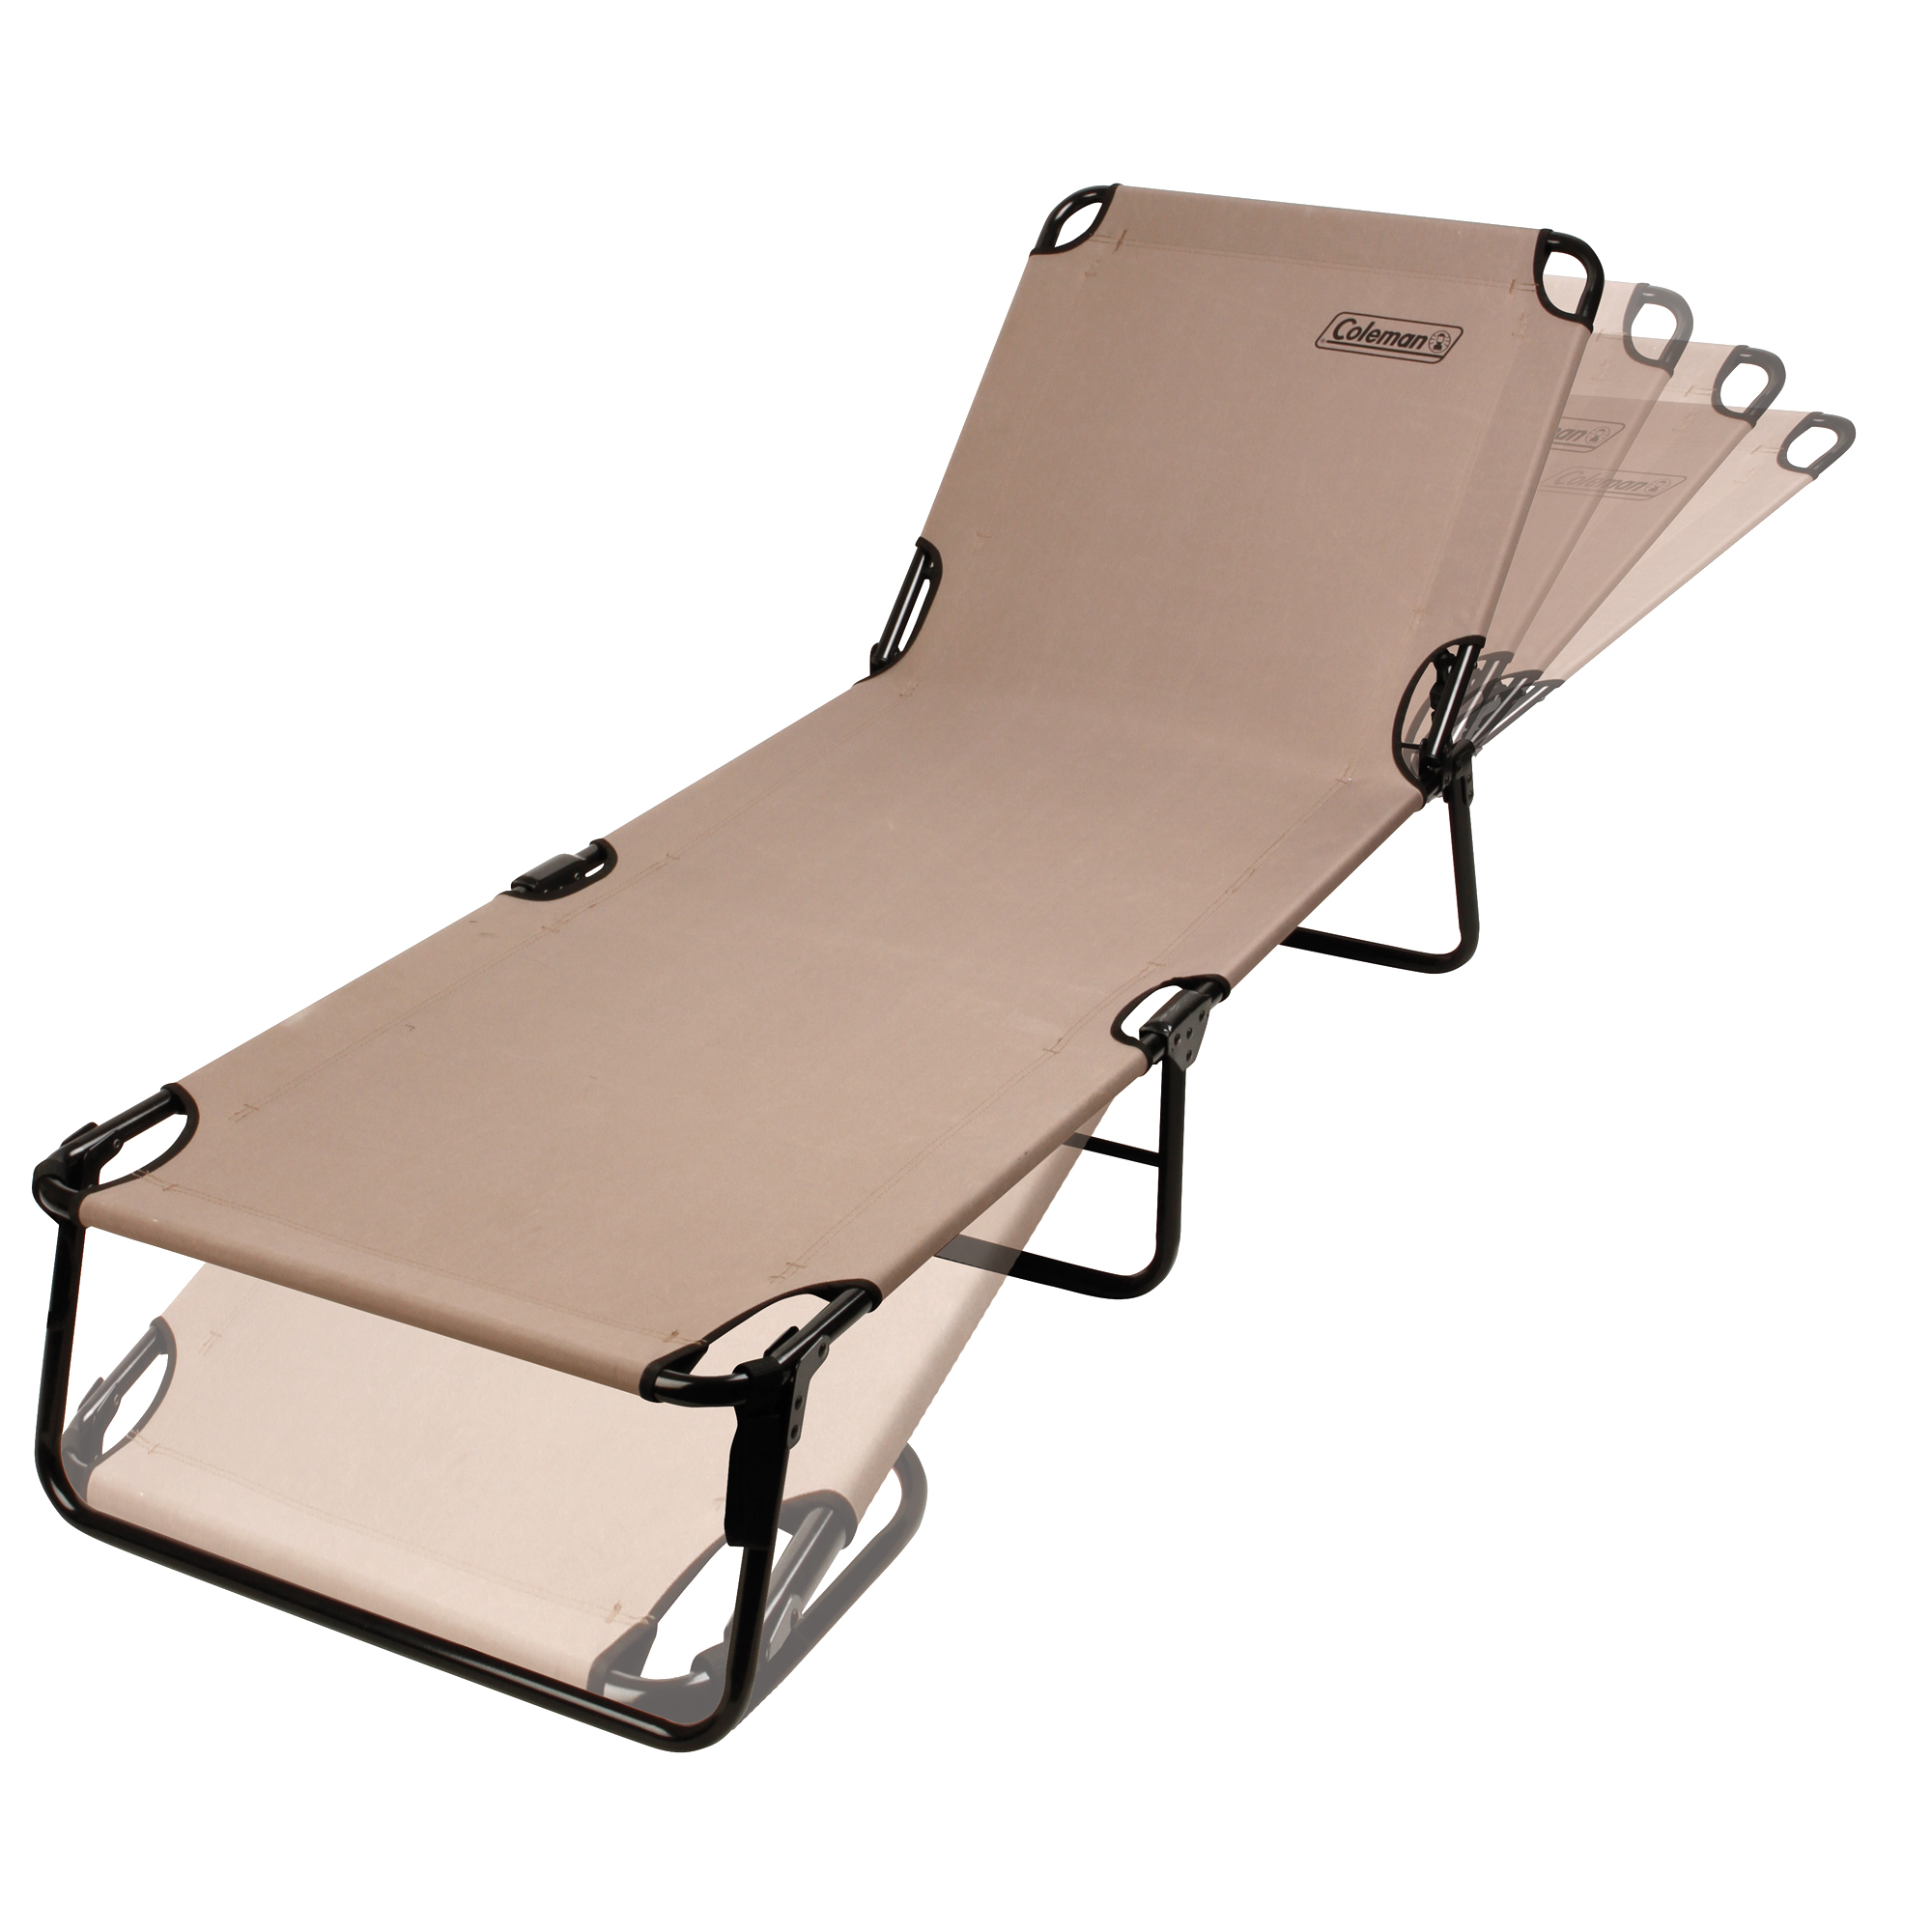 Coleman Convertible Cot and Lounge Chair with 6 Reclining and Folding Positions - image 4 of 8